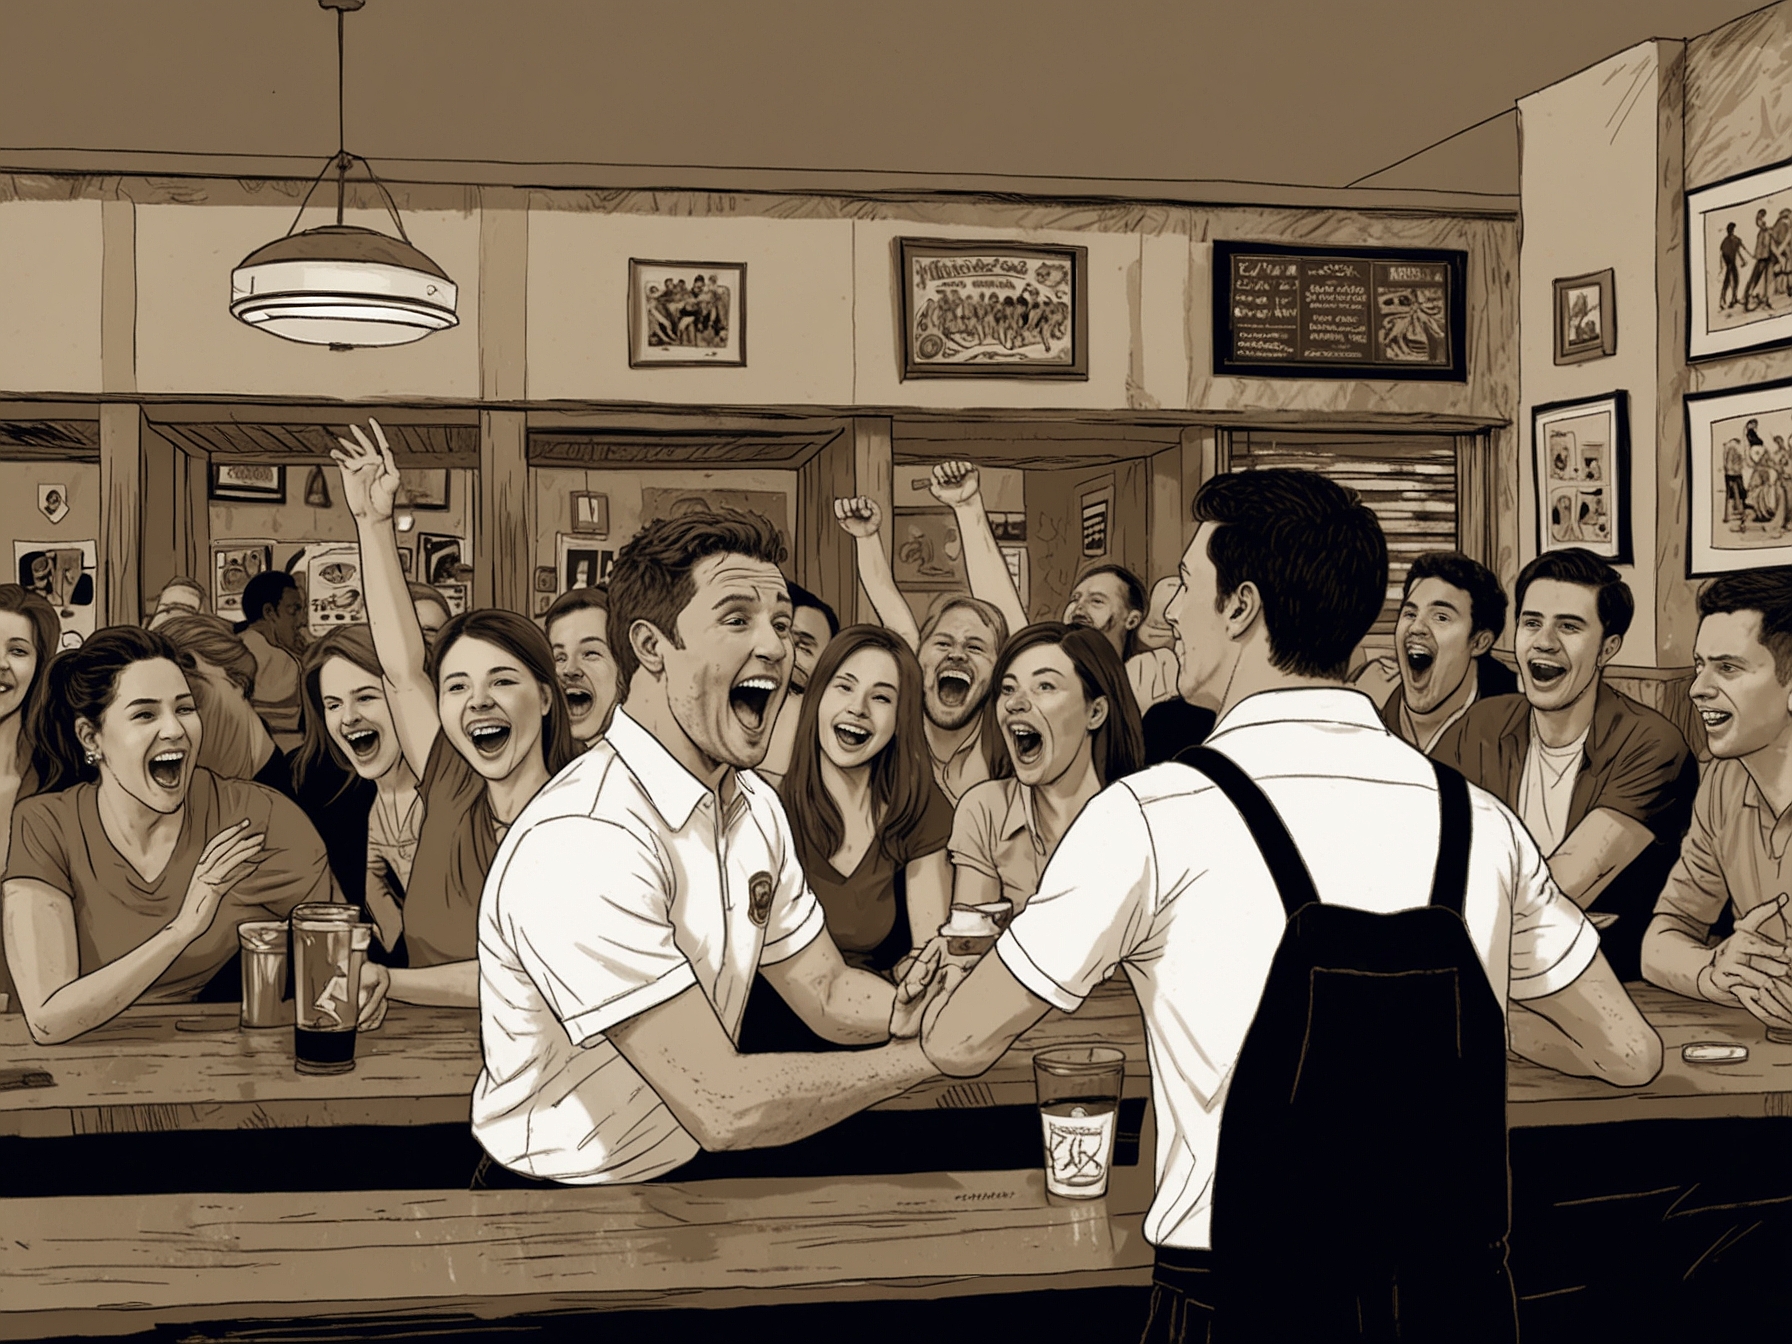 A scene depicting a large group of excited football fans chanting and trying to get close to Jude Bellingham inside a restaurant, highlighting the challenges of fame and need for security.